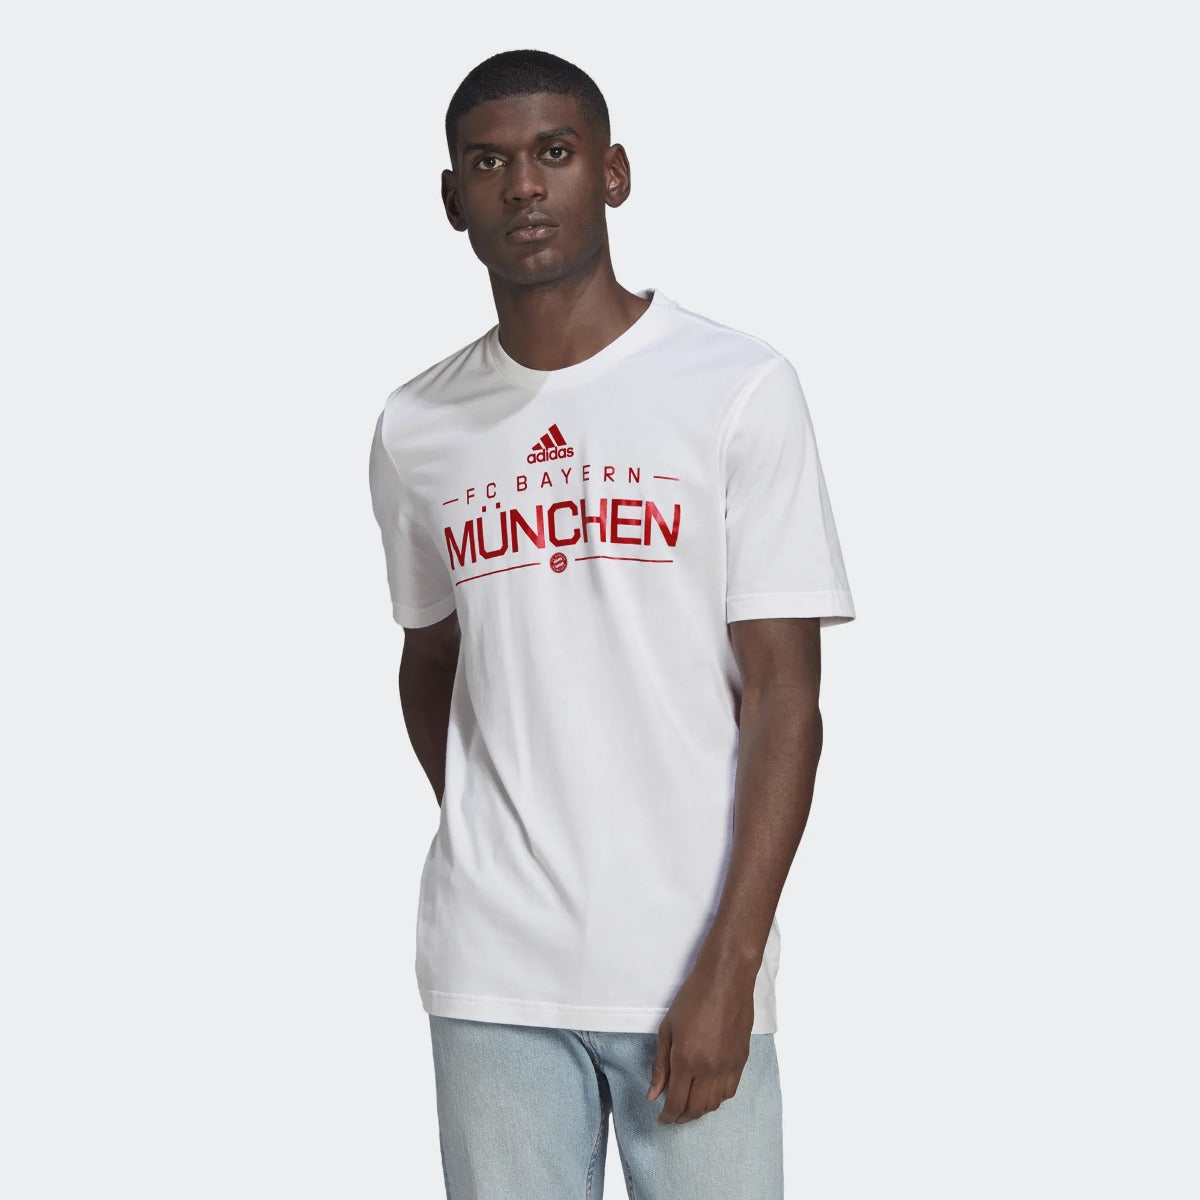 adidas 22-23 Bayern Munich Graphic Tee - White-Red (Model - Front)